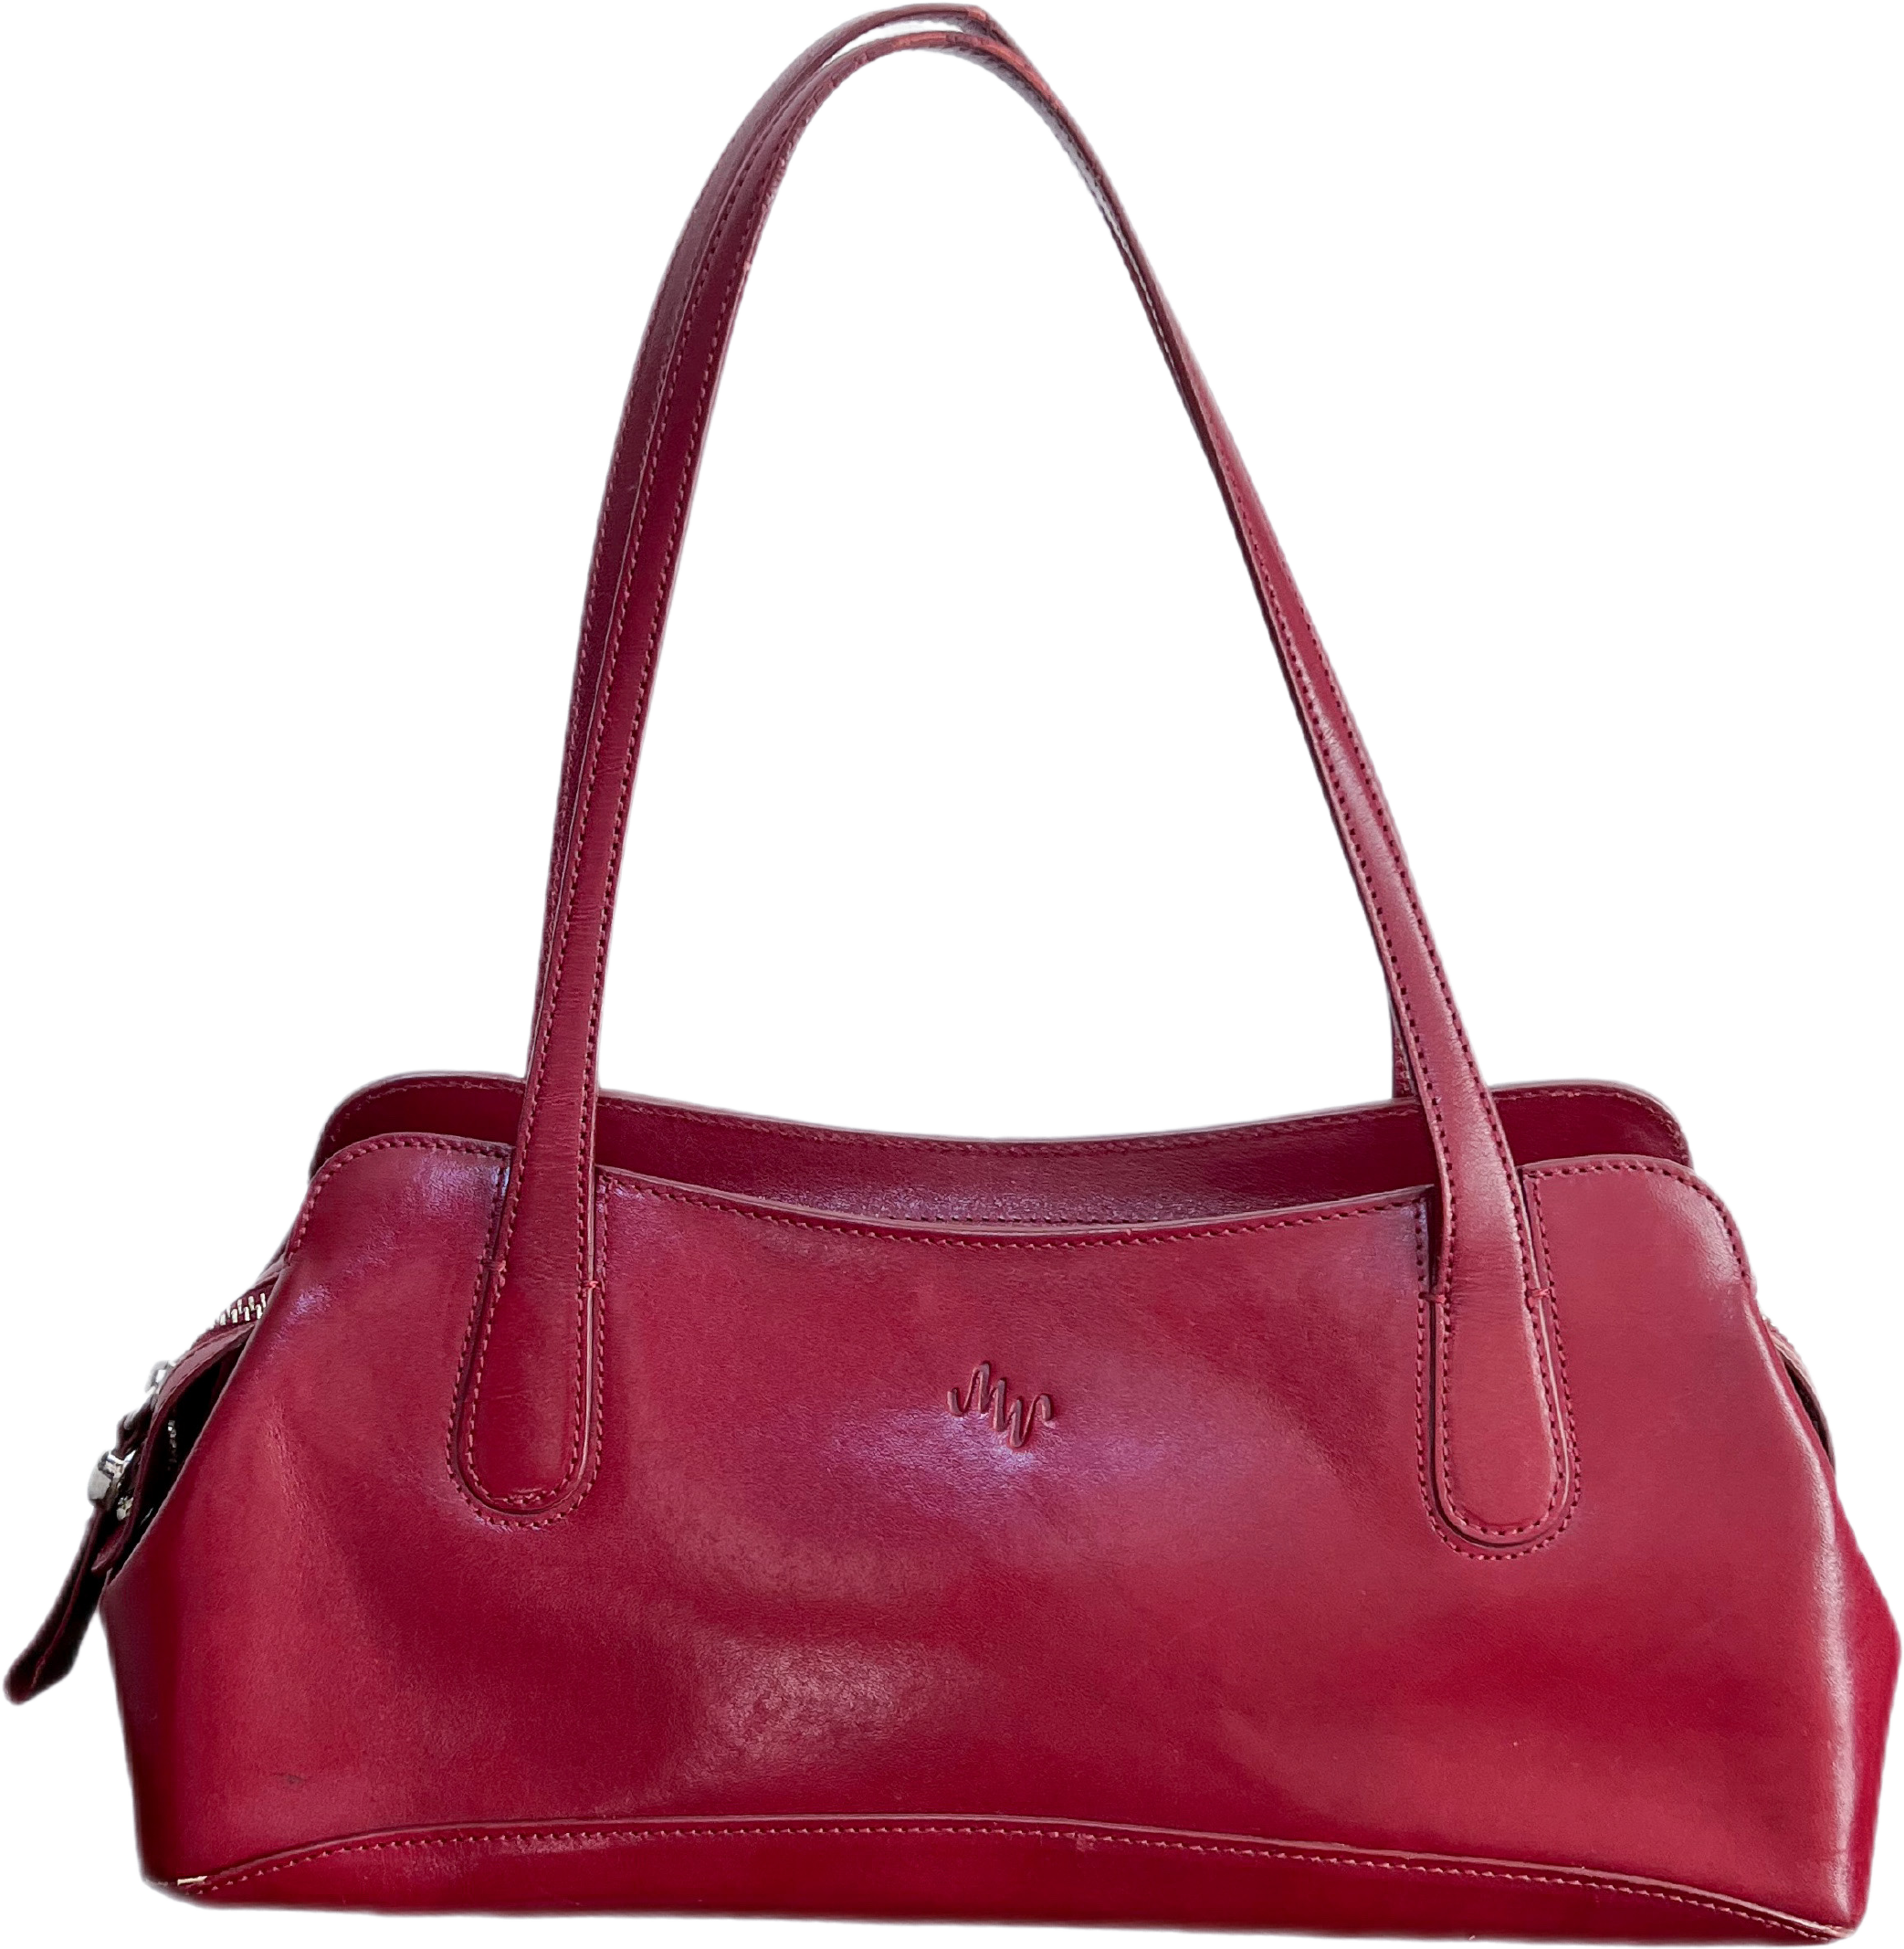 Red leather rectangular purse